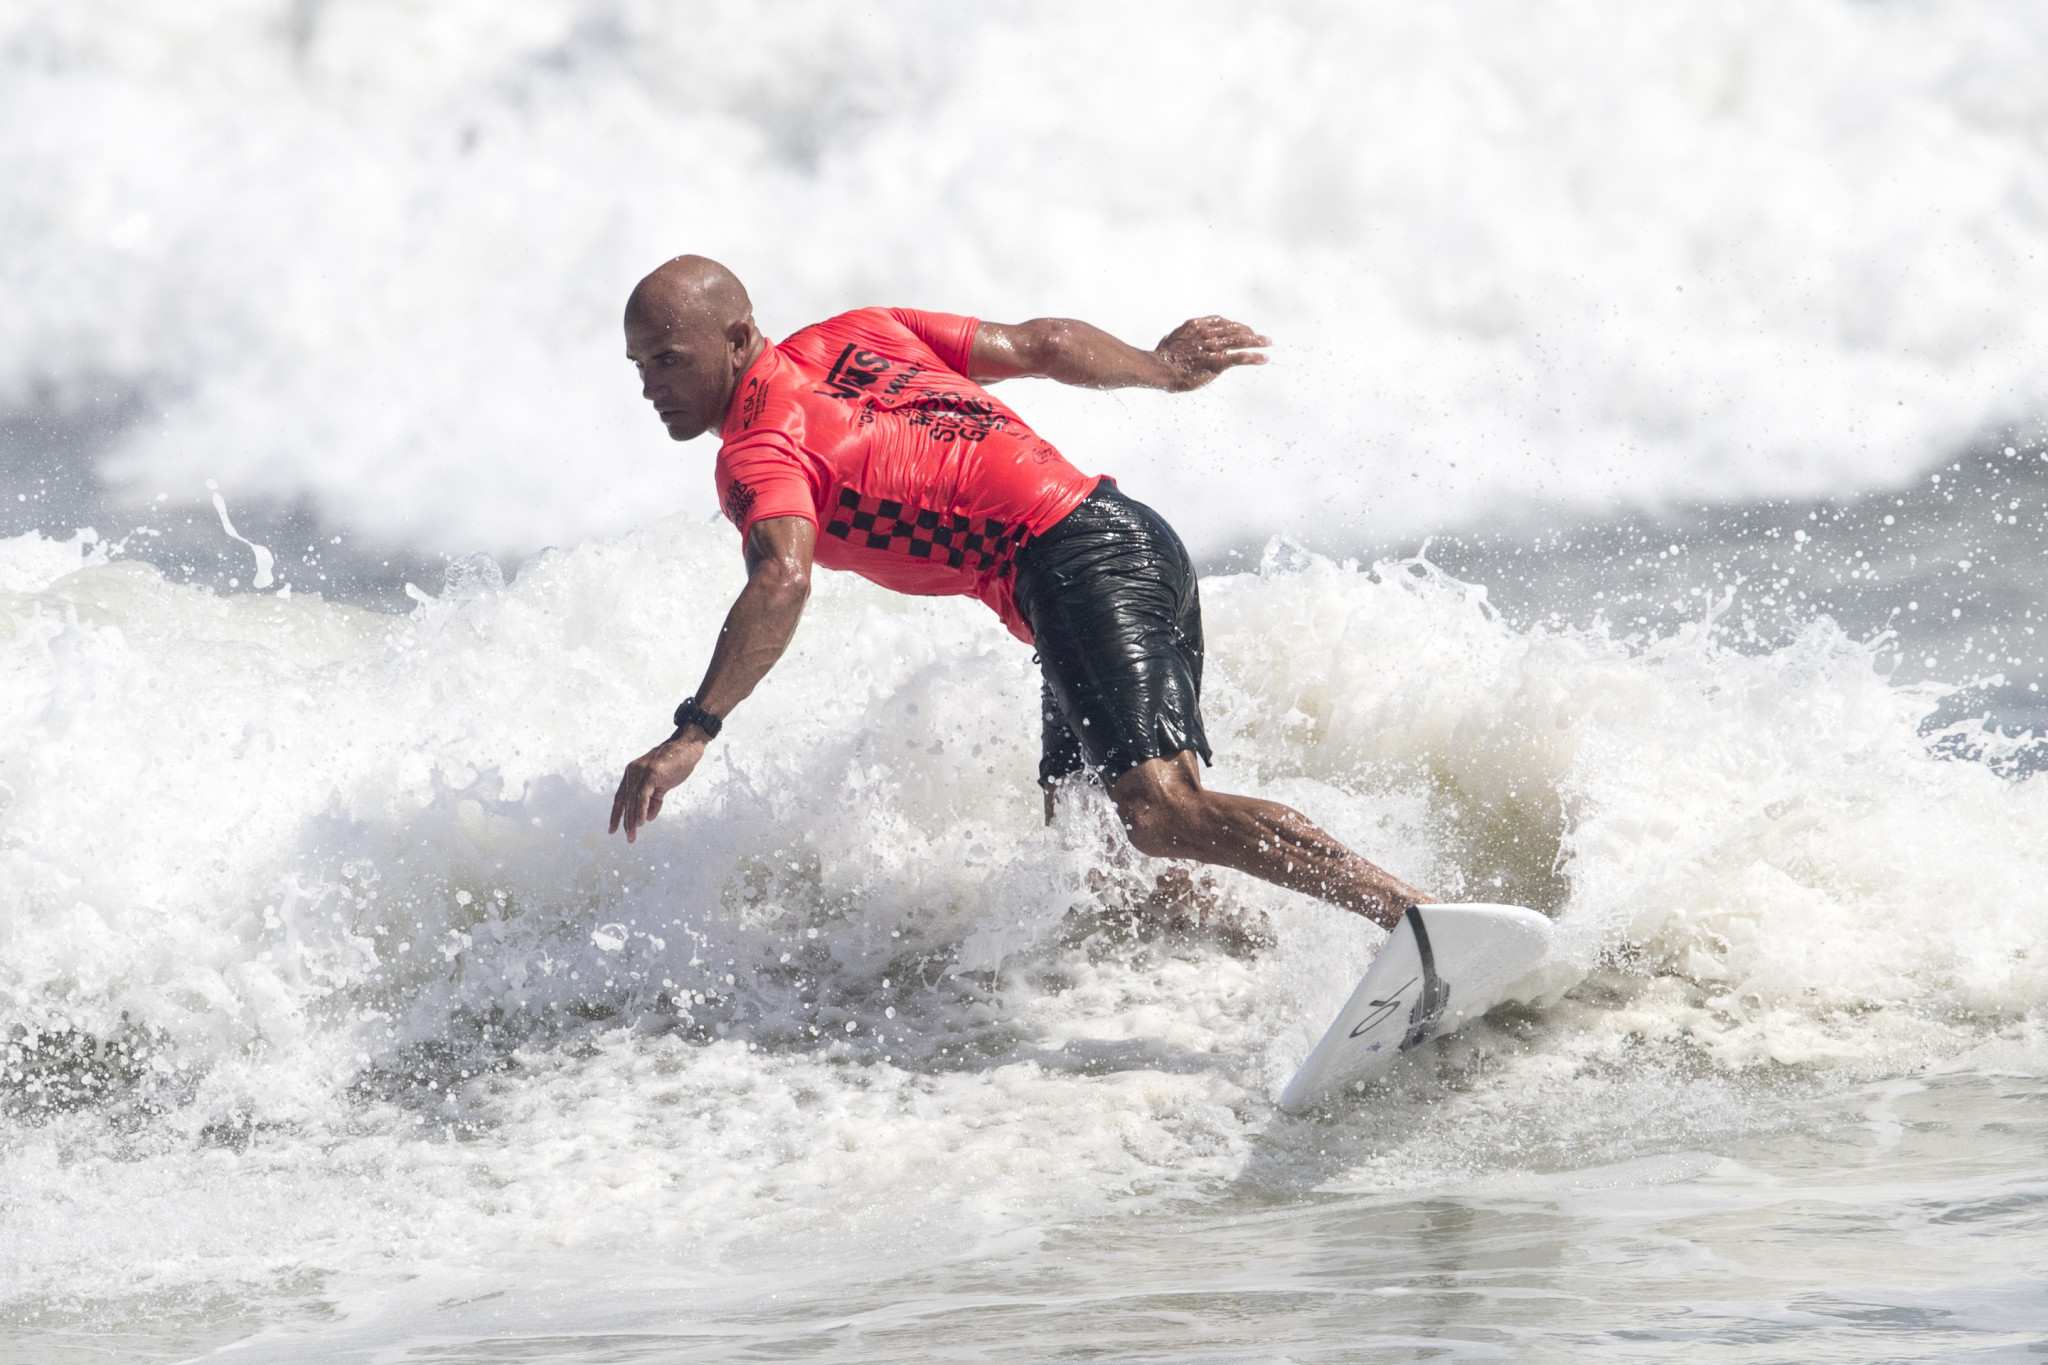 Surfing legend Kelly Slater says he is excited about his sport making its Olympic debut at Tokyo 2020 ©Getty Images